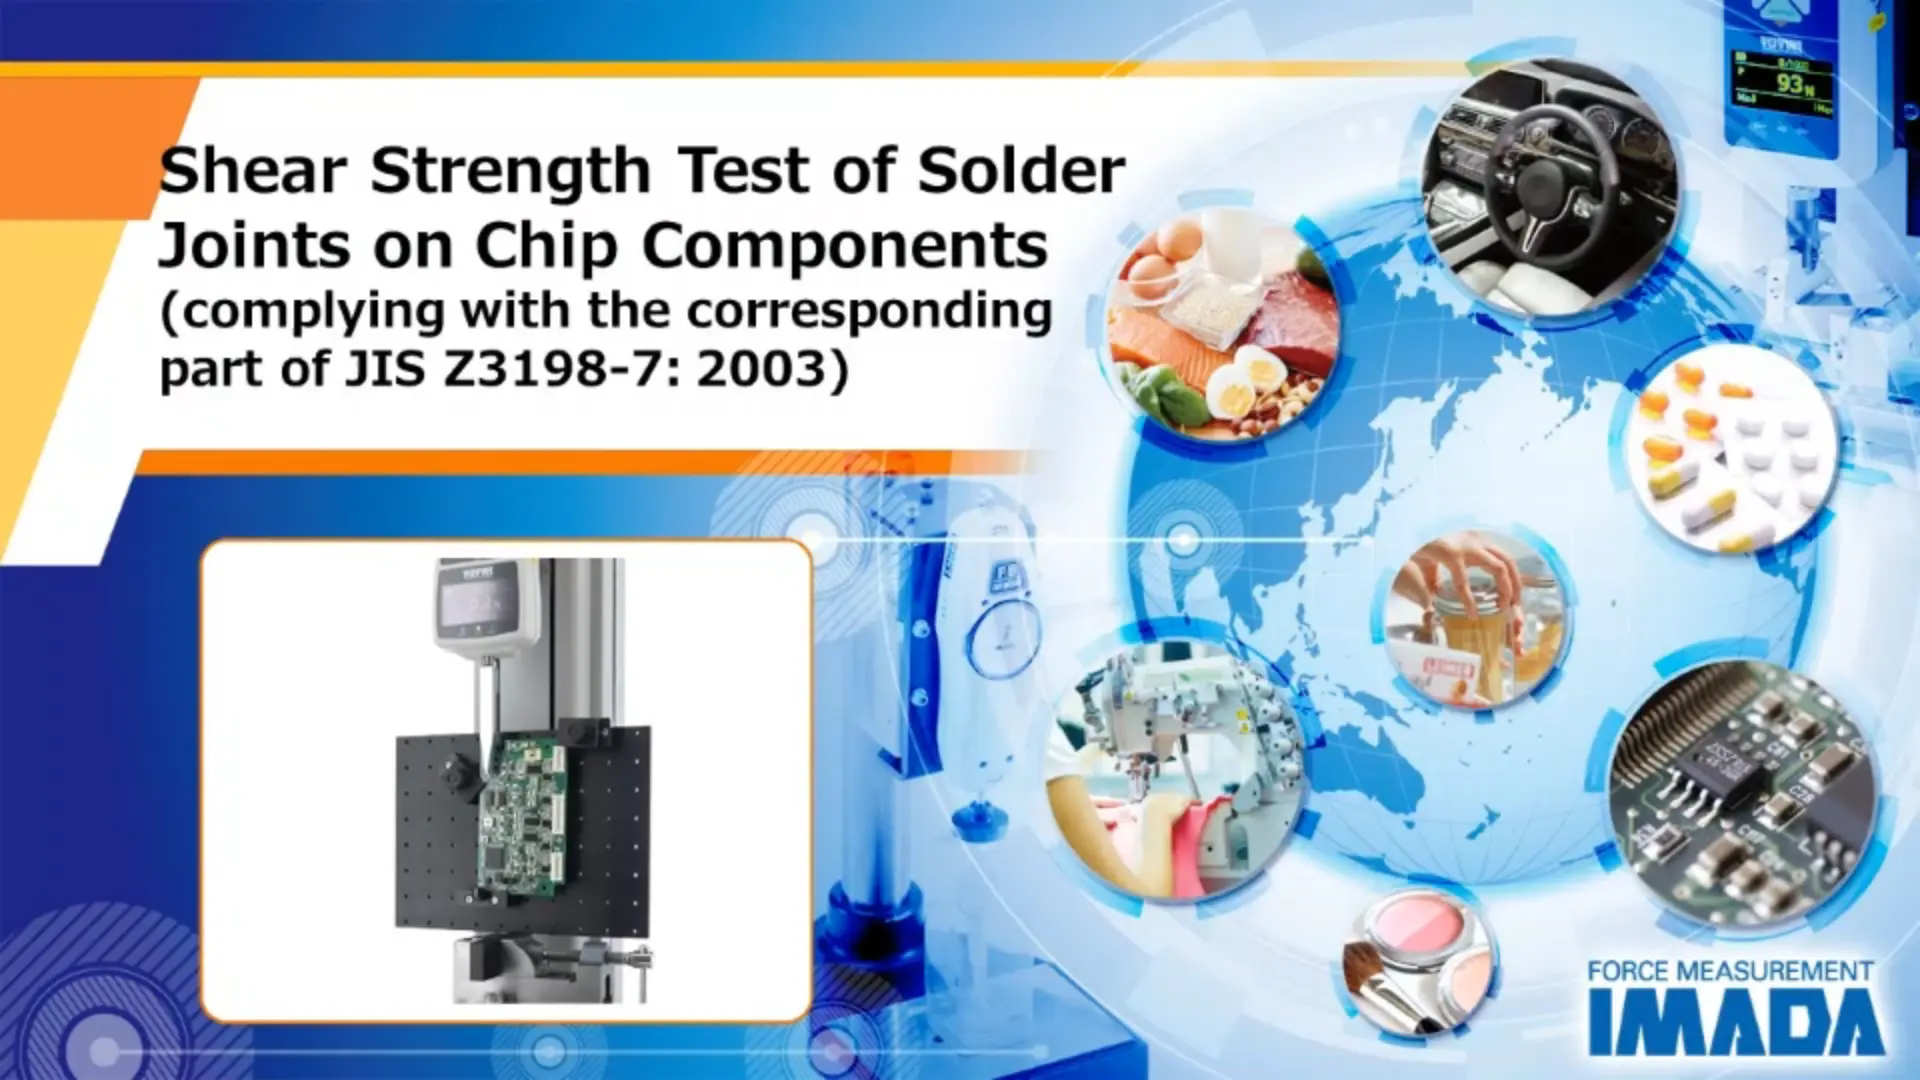 Shear Strength Test of Solder Joints on Chip Components (complies with the corresponding part of JIS Z3198-7: 2003)